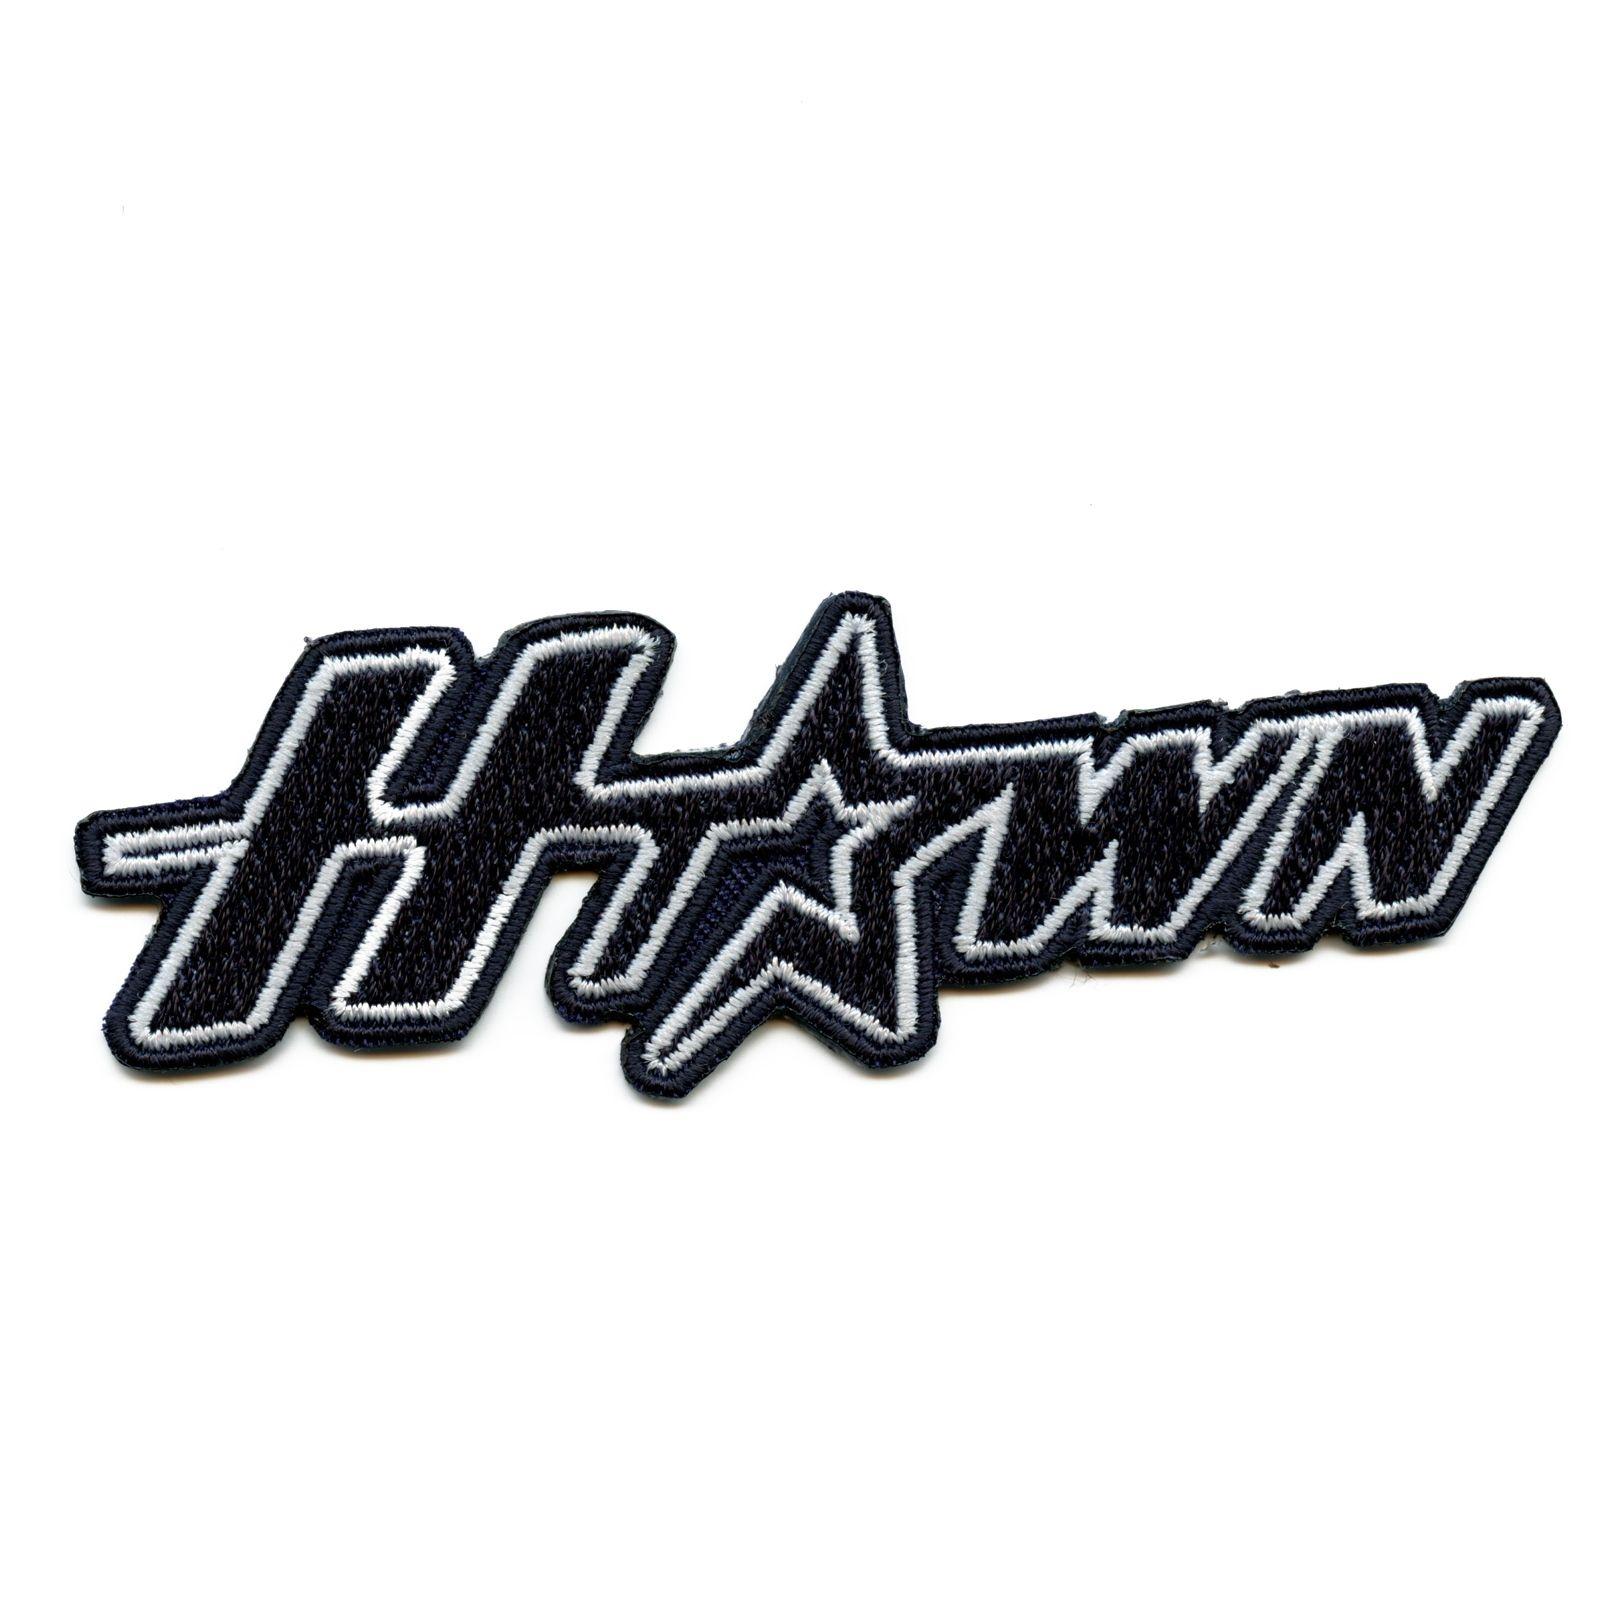 H-Town Logo - Details About H Town Houston Baseball Team Parody Logo Embroidered Iron On Patch